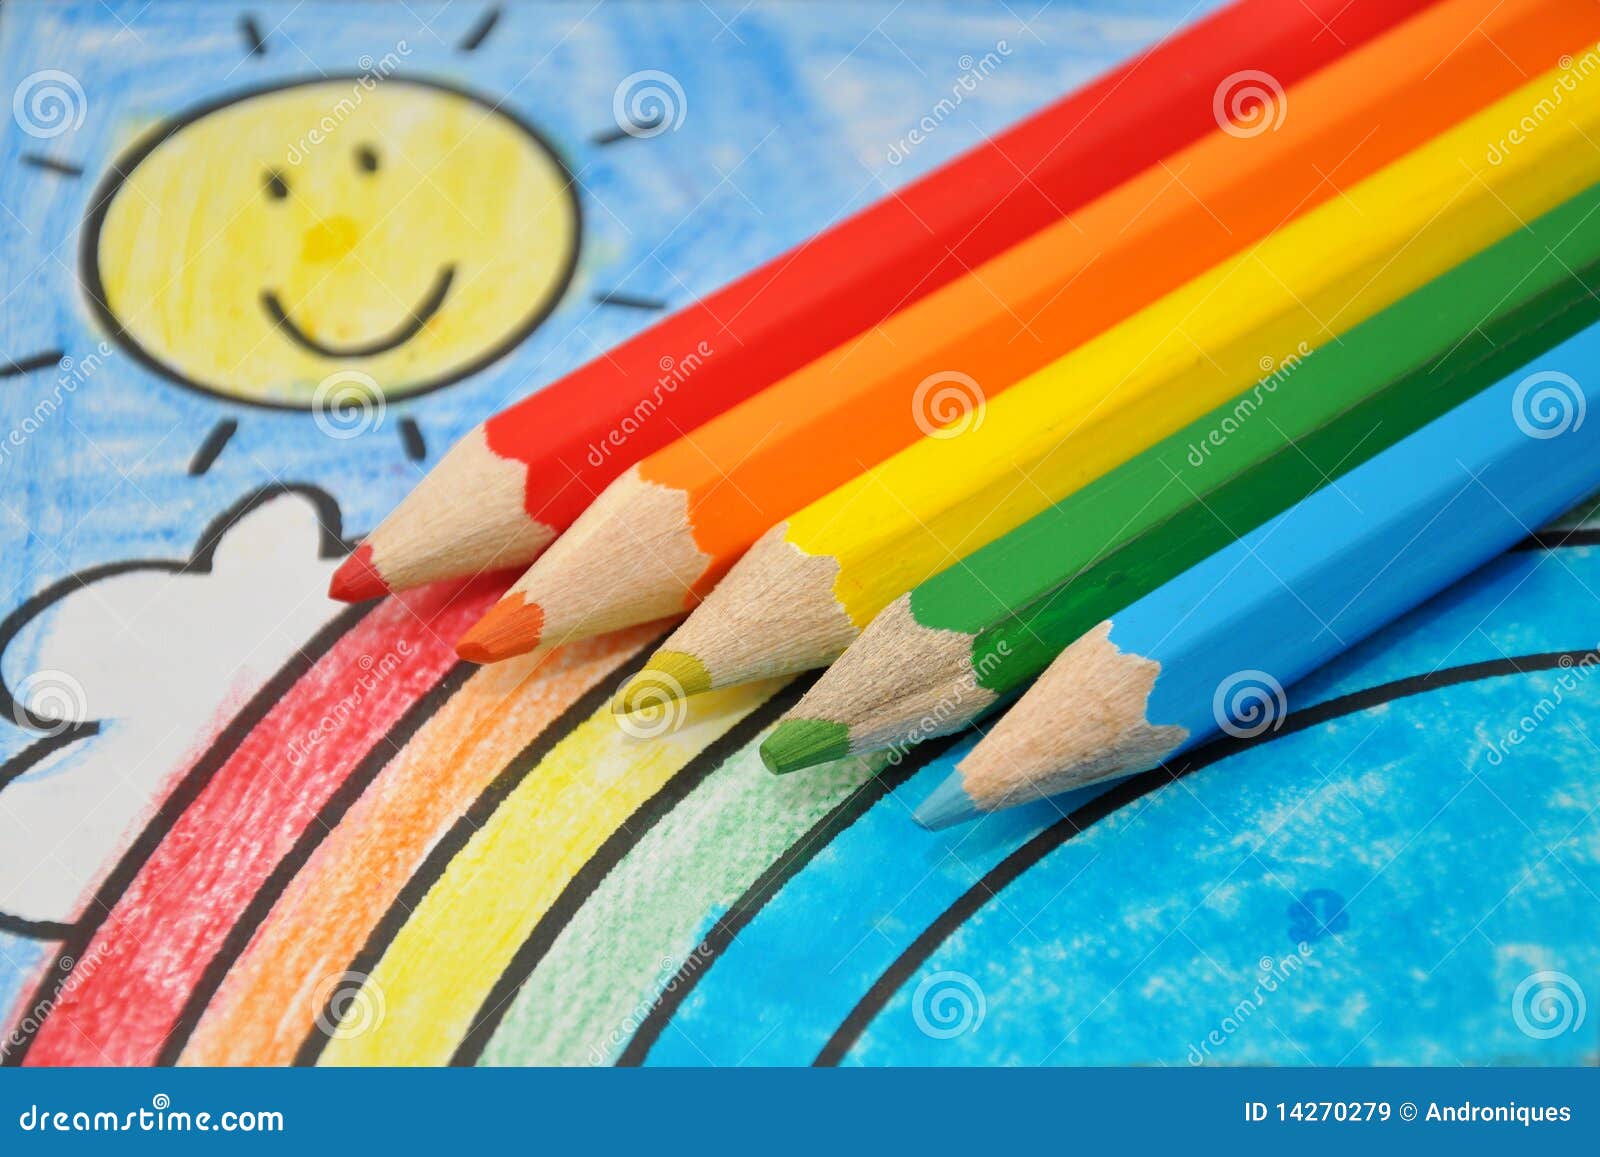 colorful drawing: smiling sun, rainbow, blue sky